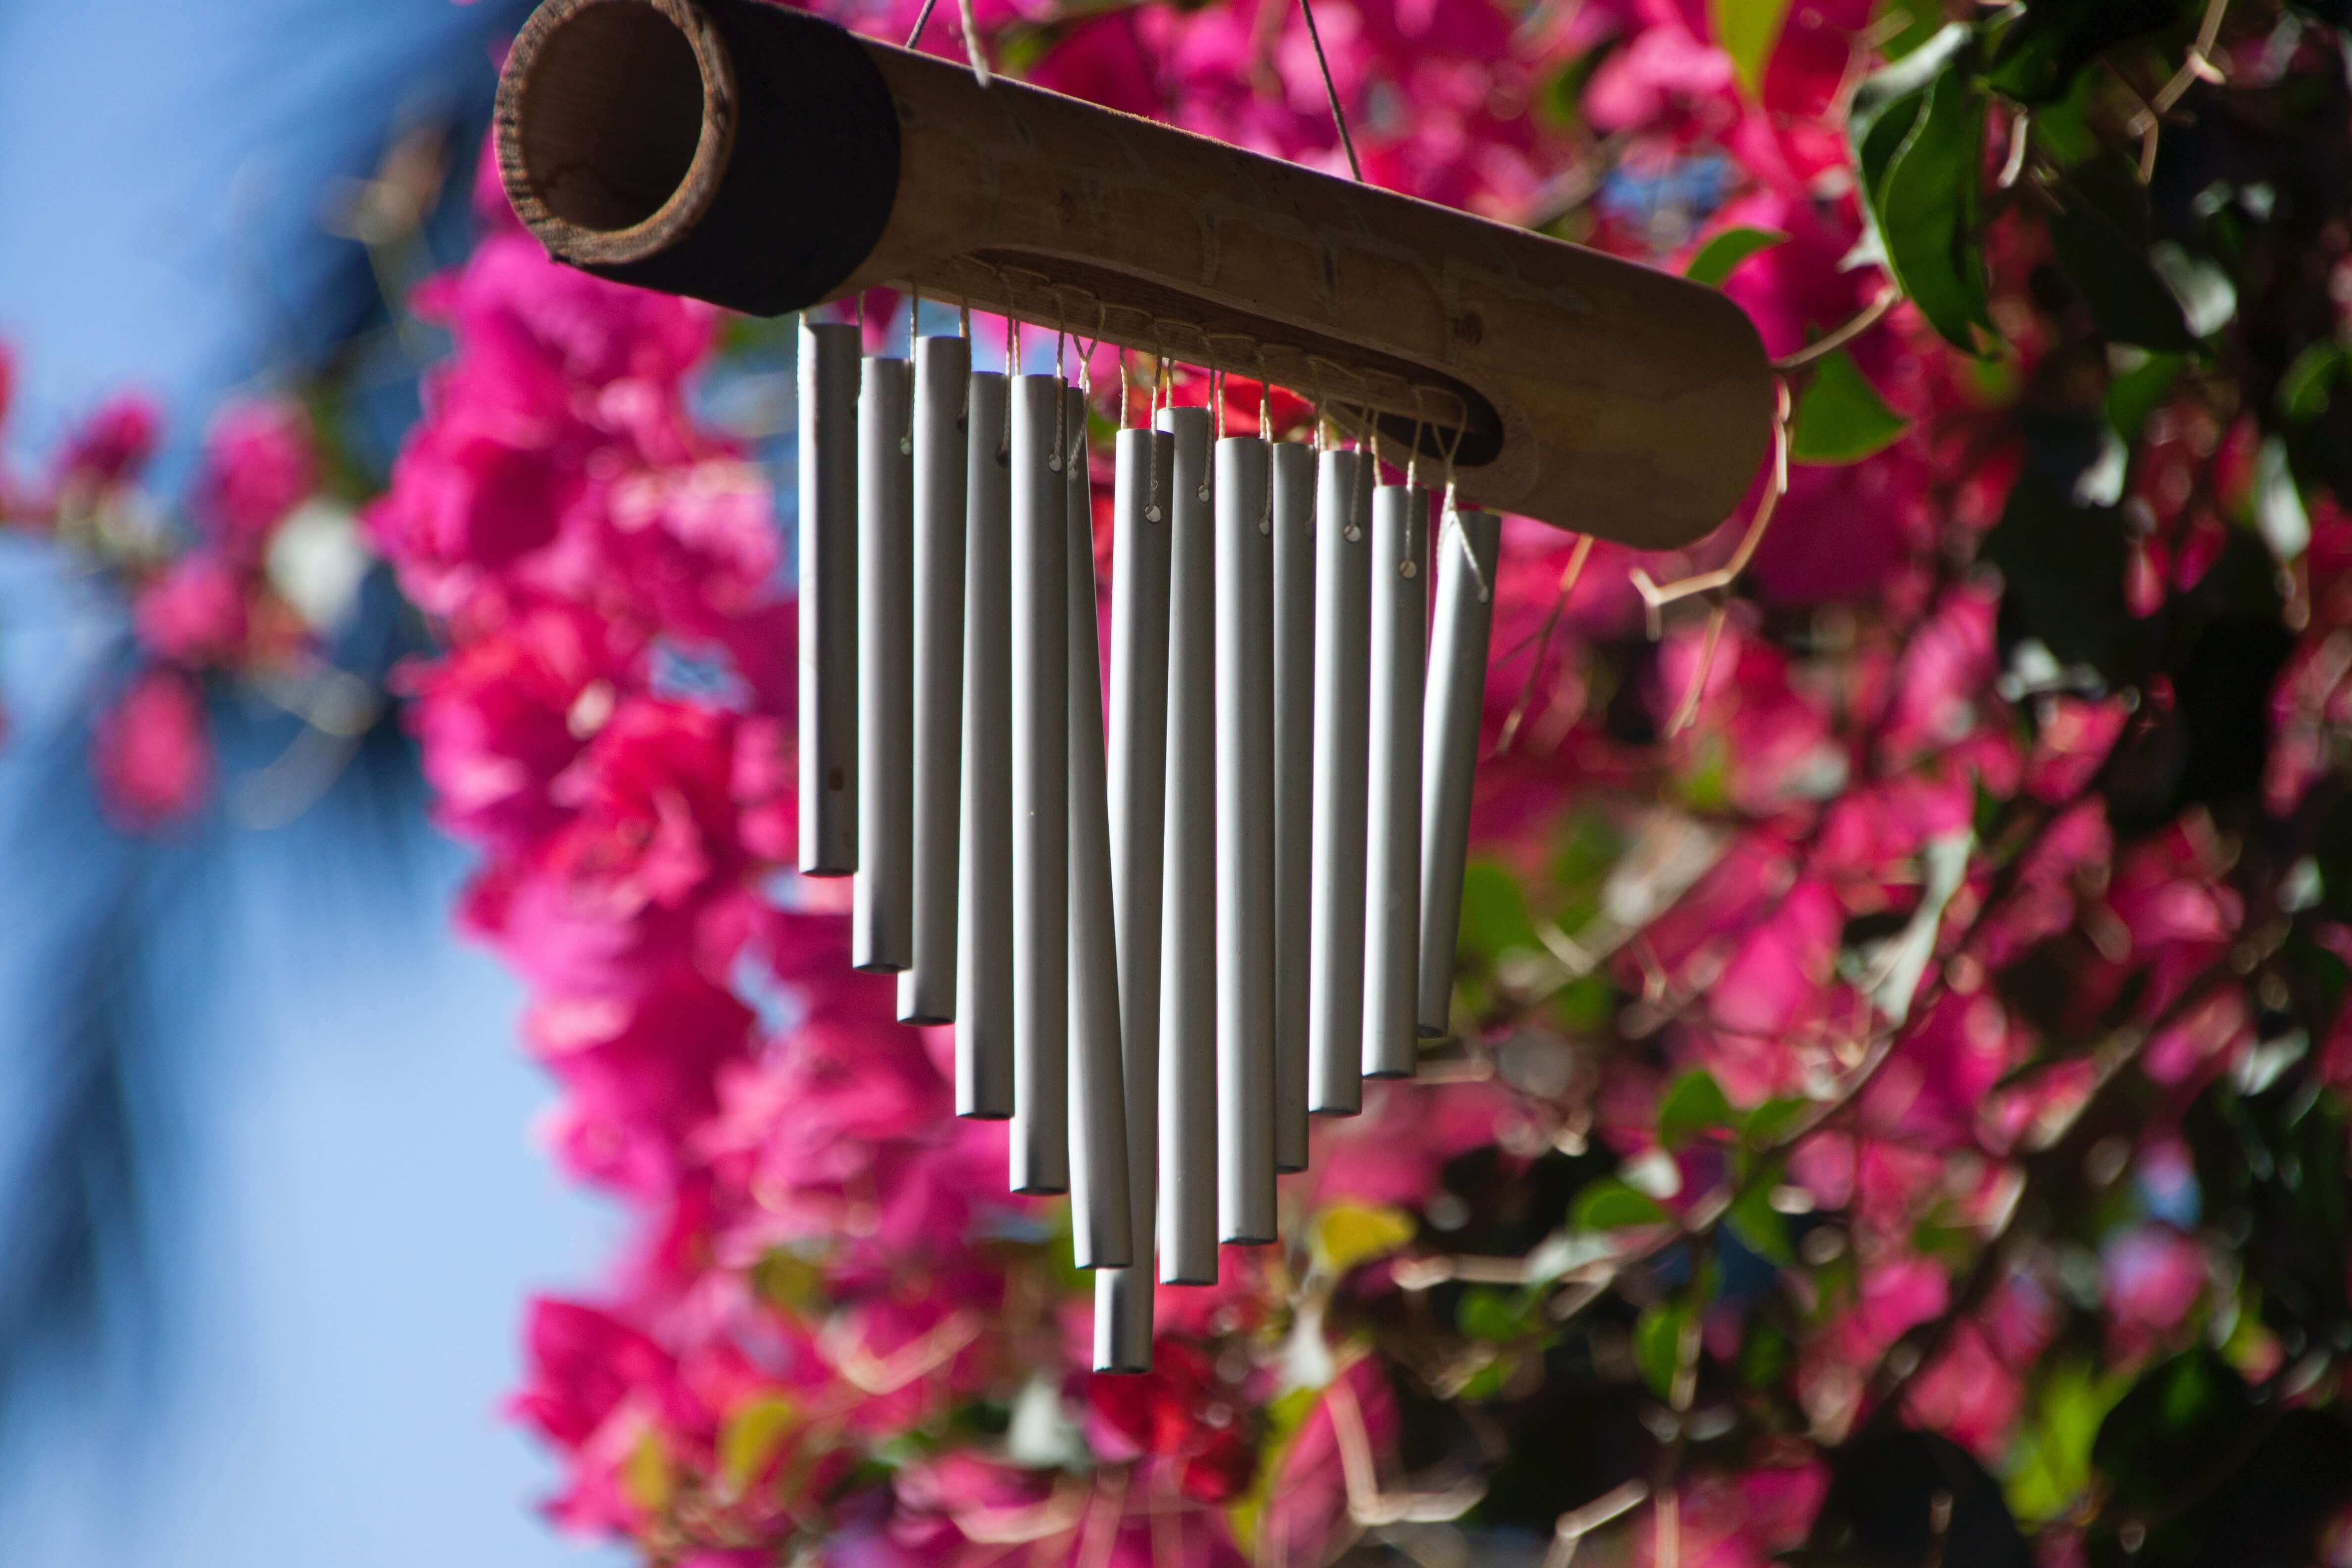 A wind chime with the chimes hanging from a wooden tube